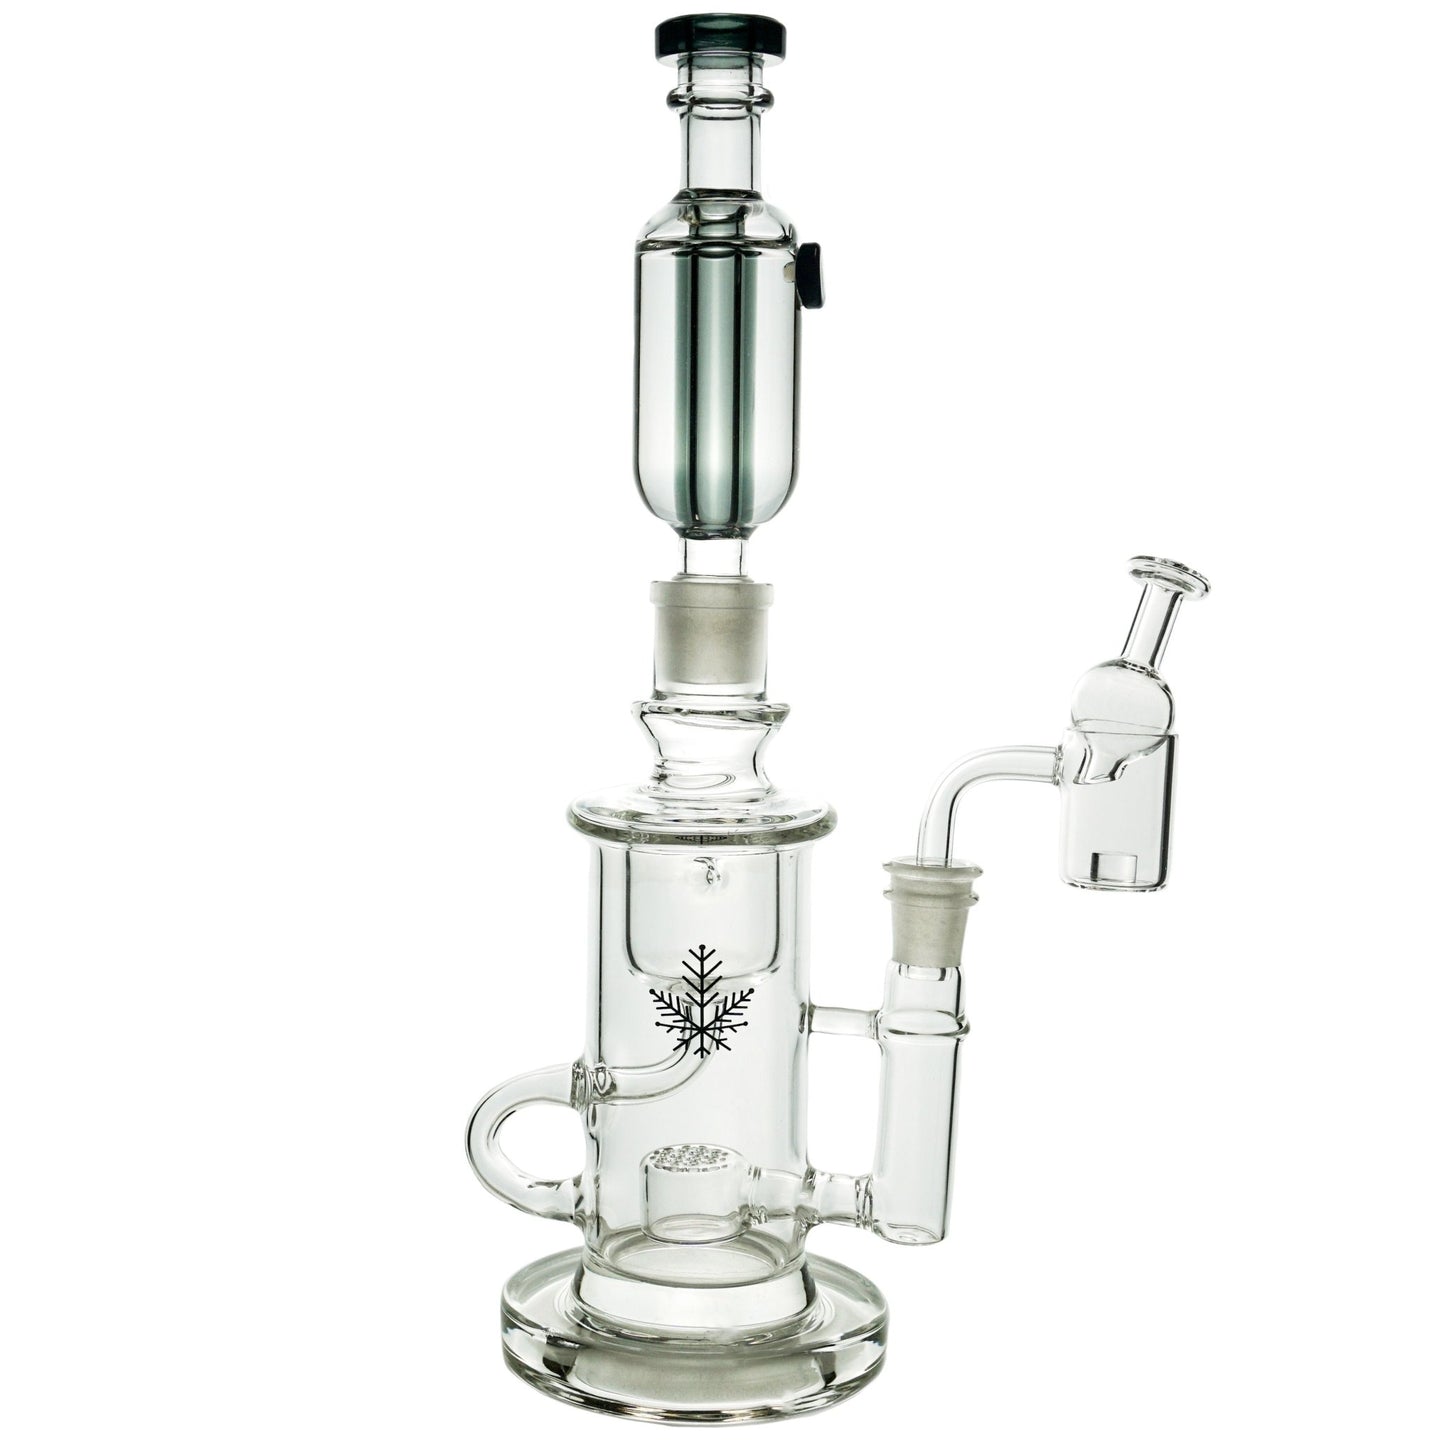 Freeze Pipe Klein Recycler - Glasss Station